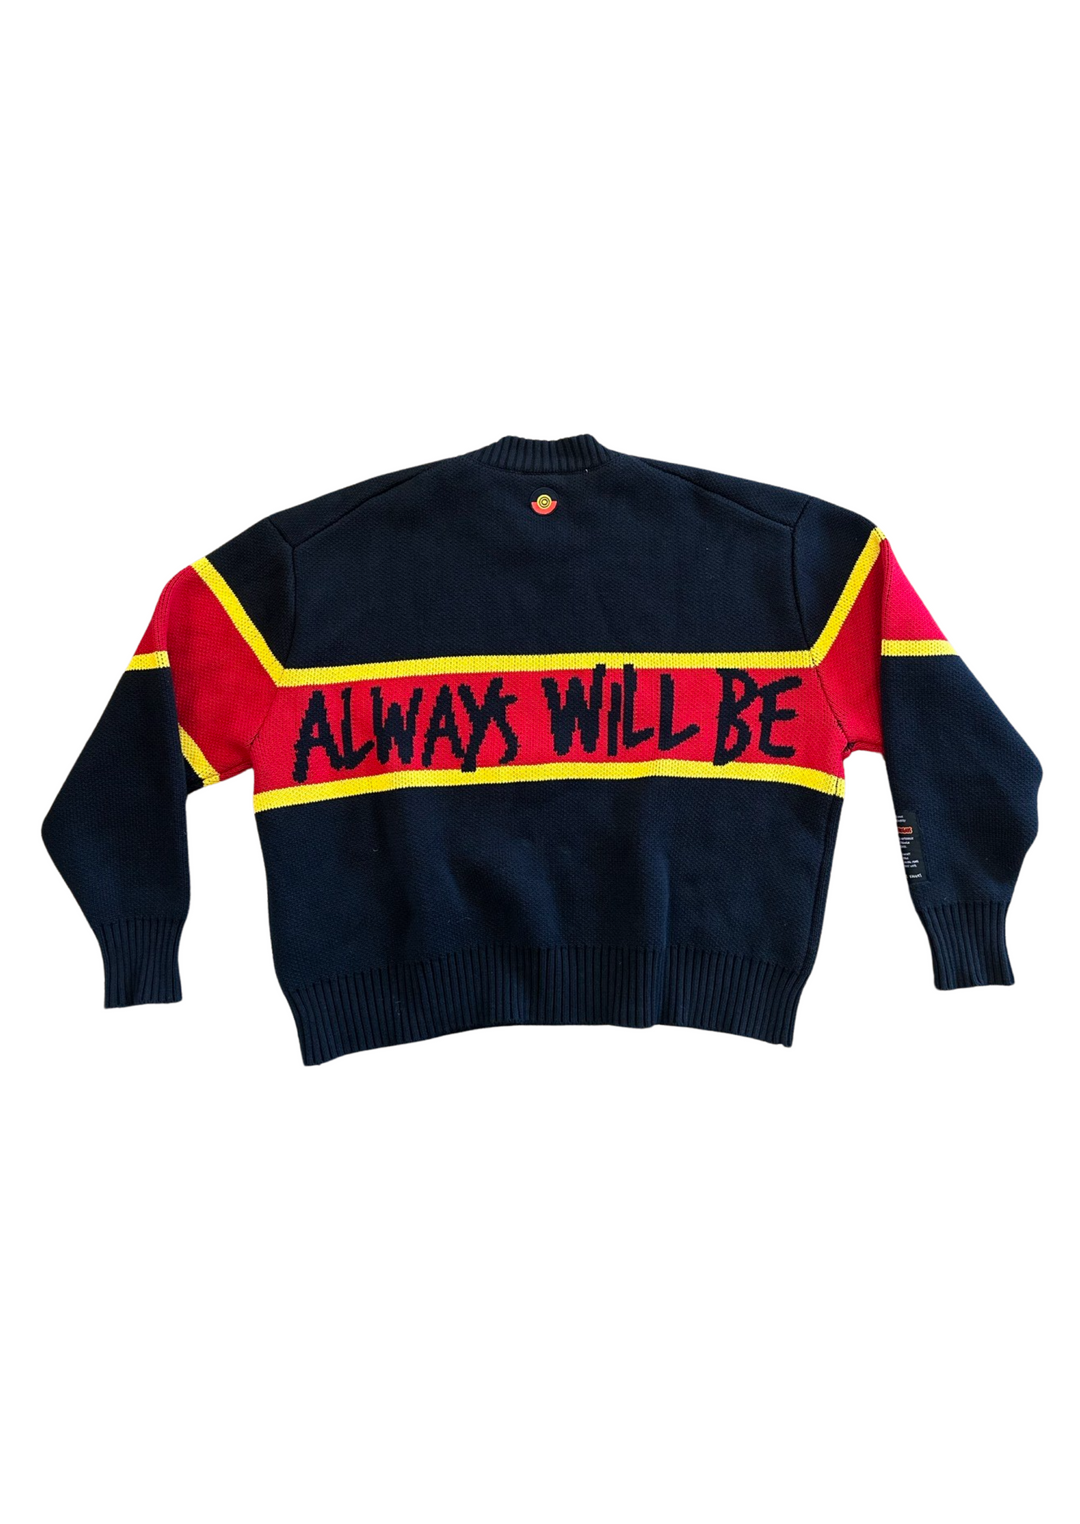 Clothing The Gaps. Power Knit Jumper. Red, black and yellow colorway heavyweight 100% cotton oversized boxy fit. Black base with thick yellow top and bottom lines and red fill in mid section of jumper that flows into same pattern on sleeves. In red section on front of jumper in bold hand-written type capital text reads 'Always was' and on back in same text 'Always will be.' With black knitted cuffs and waistband.